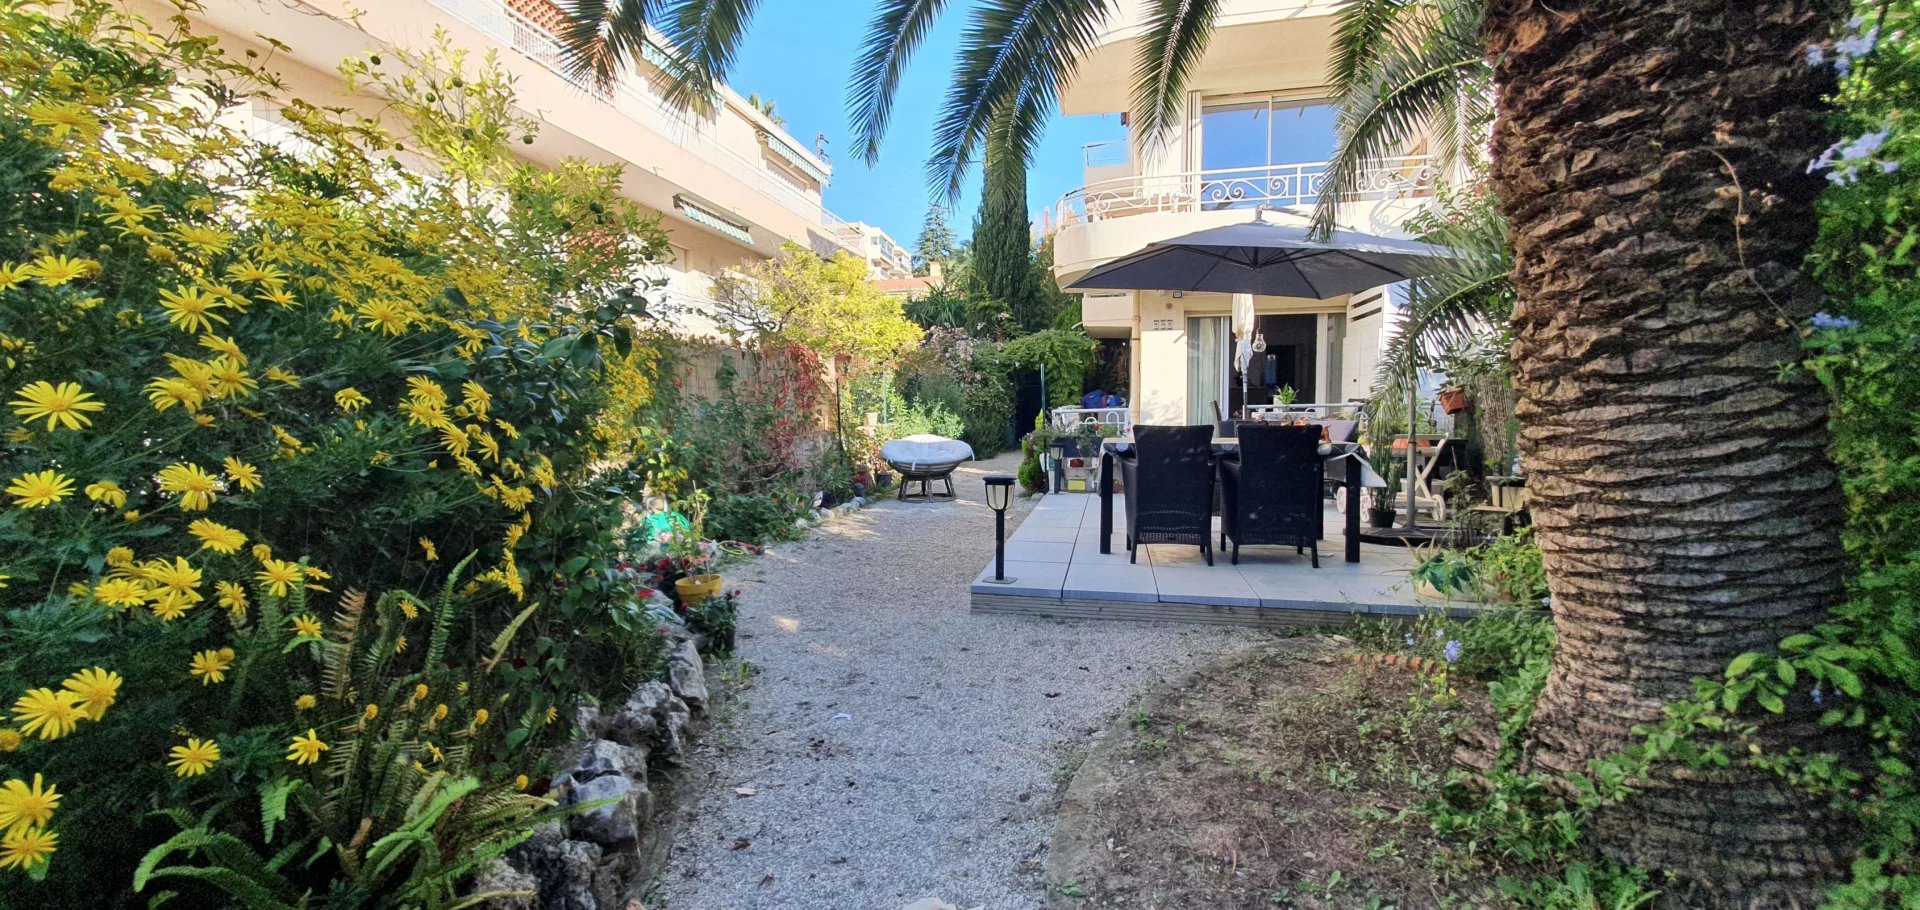 Cannes Plage du Midi property for sale with private garden